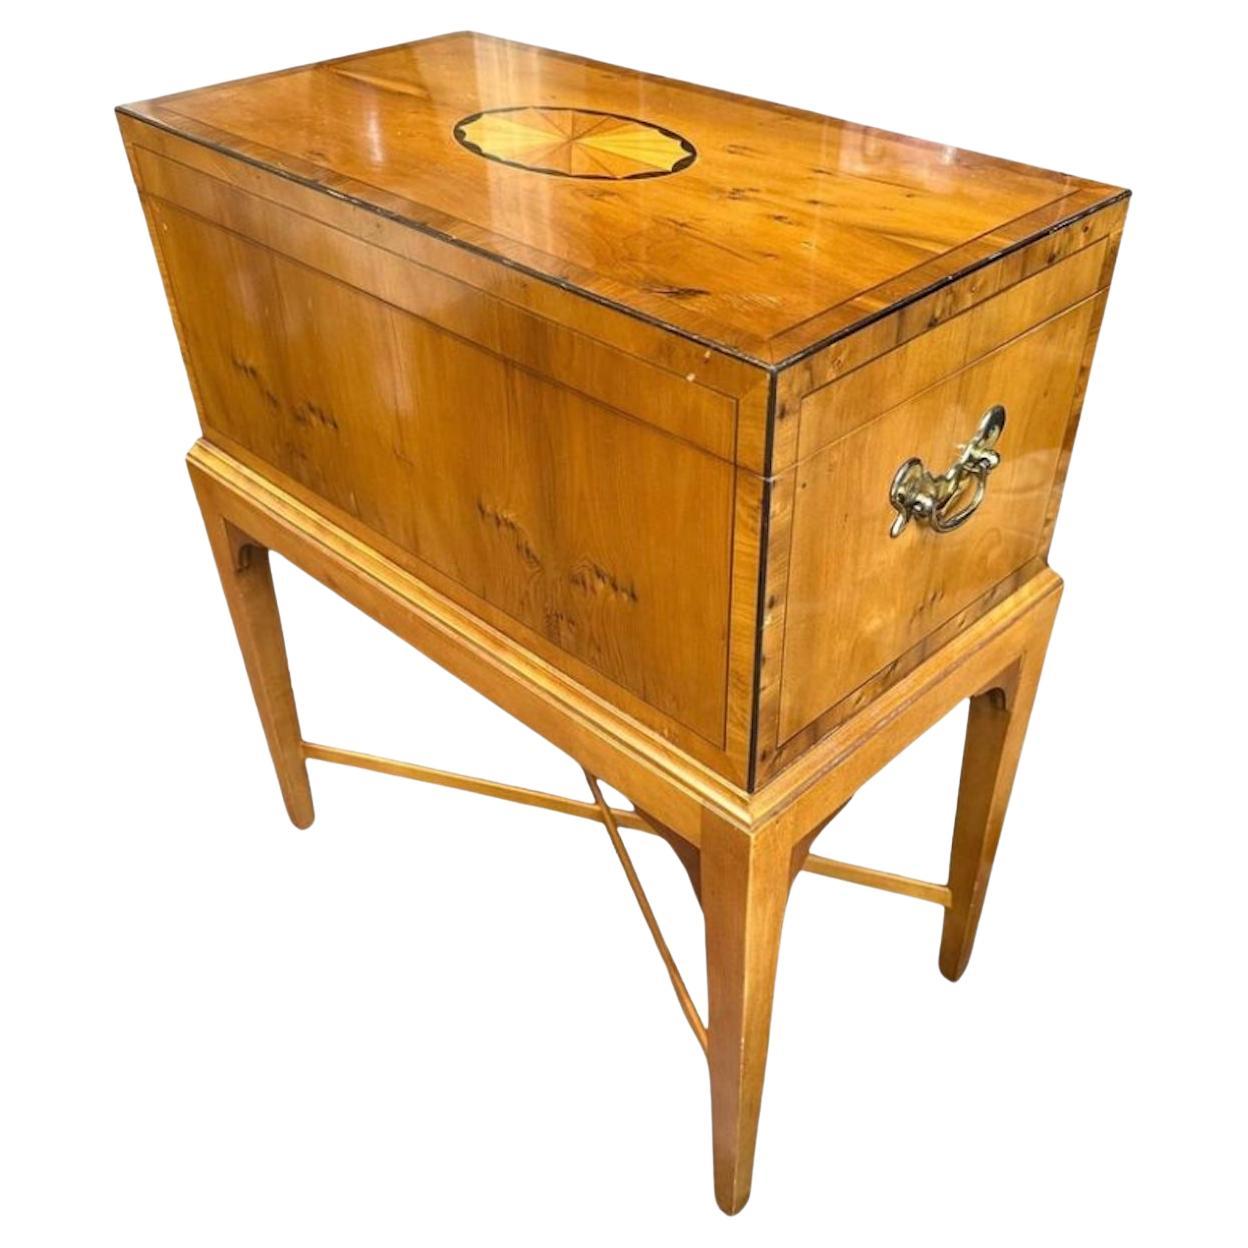 Baker Furniture Side Table Or Humidor. Satinwood With Inlay. For Sale